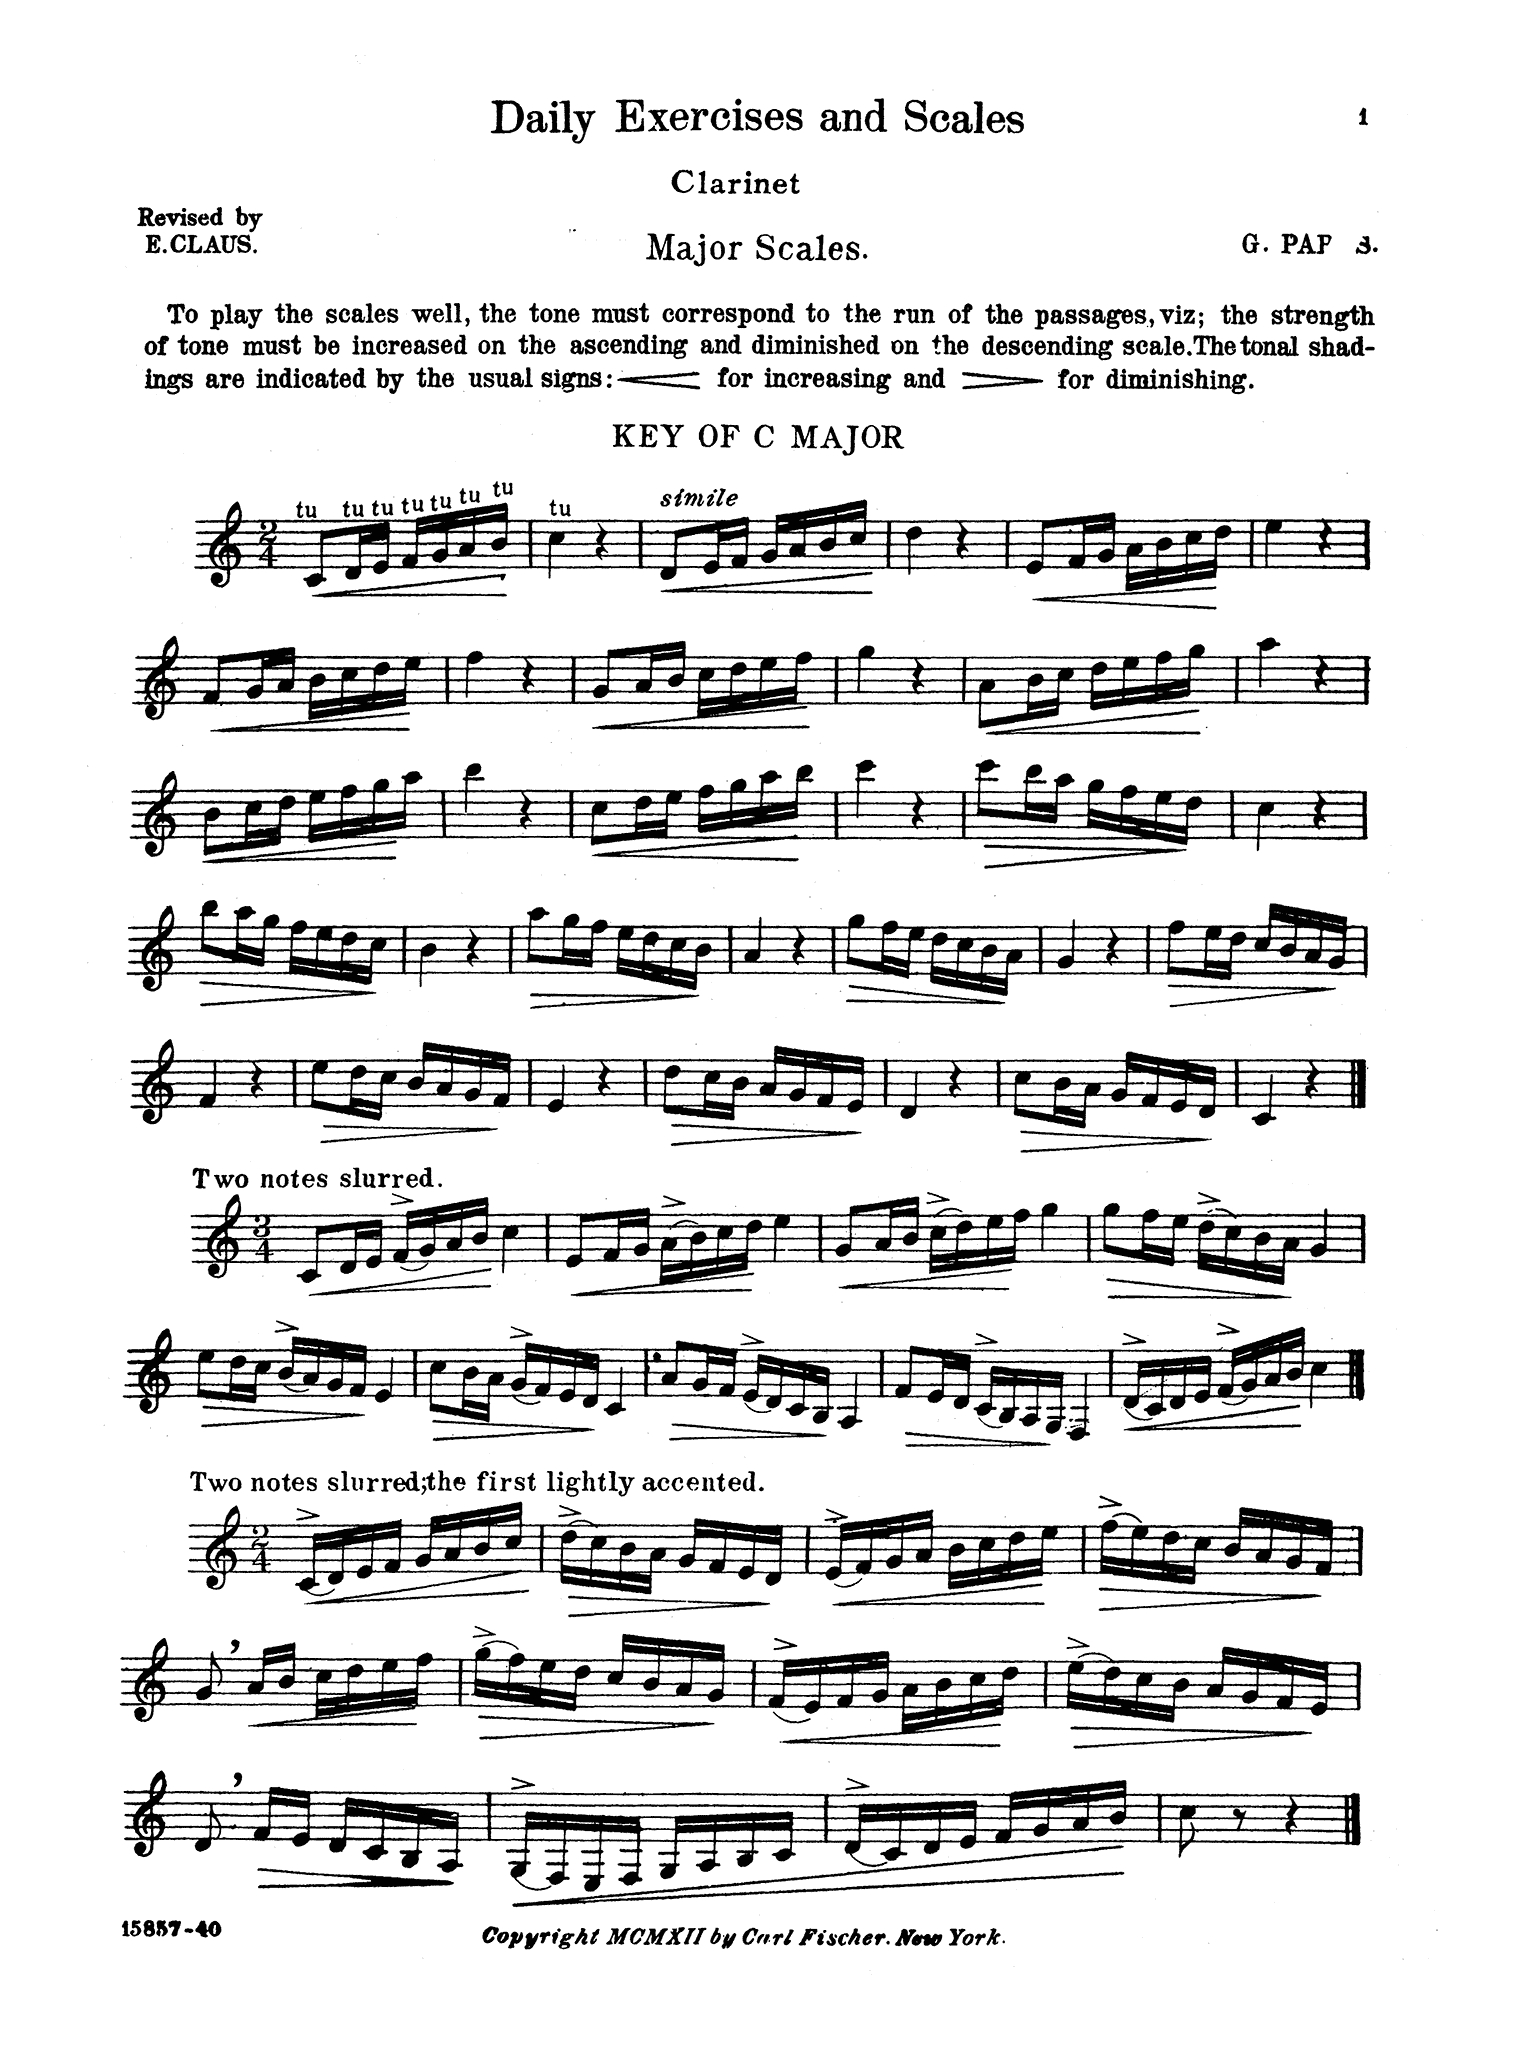 Parès Daily Exercises & Scales for Clarinet page 1